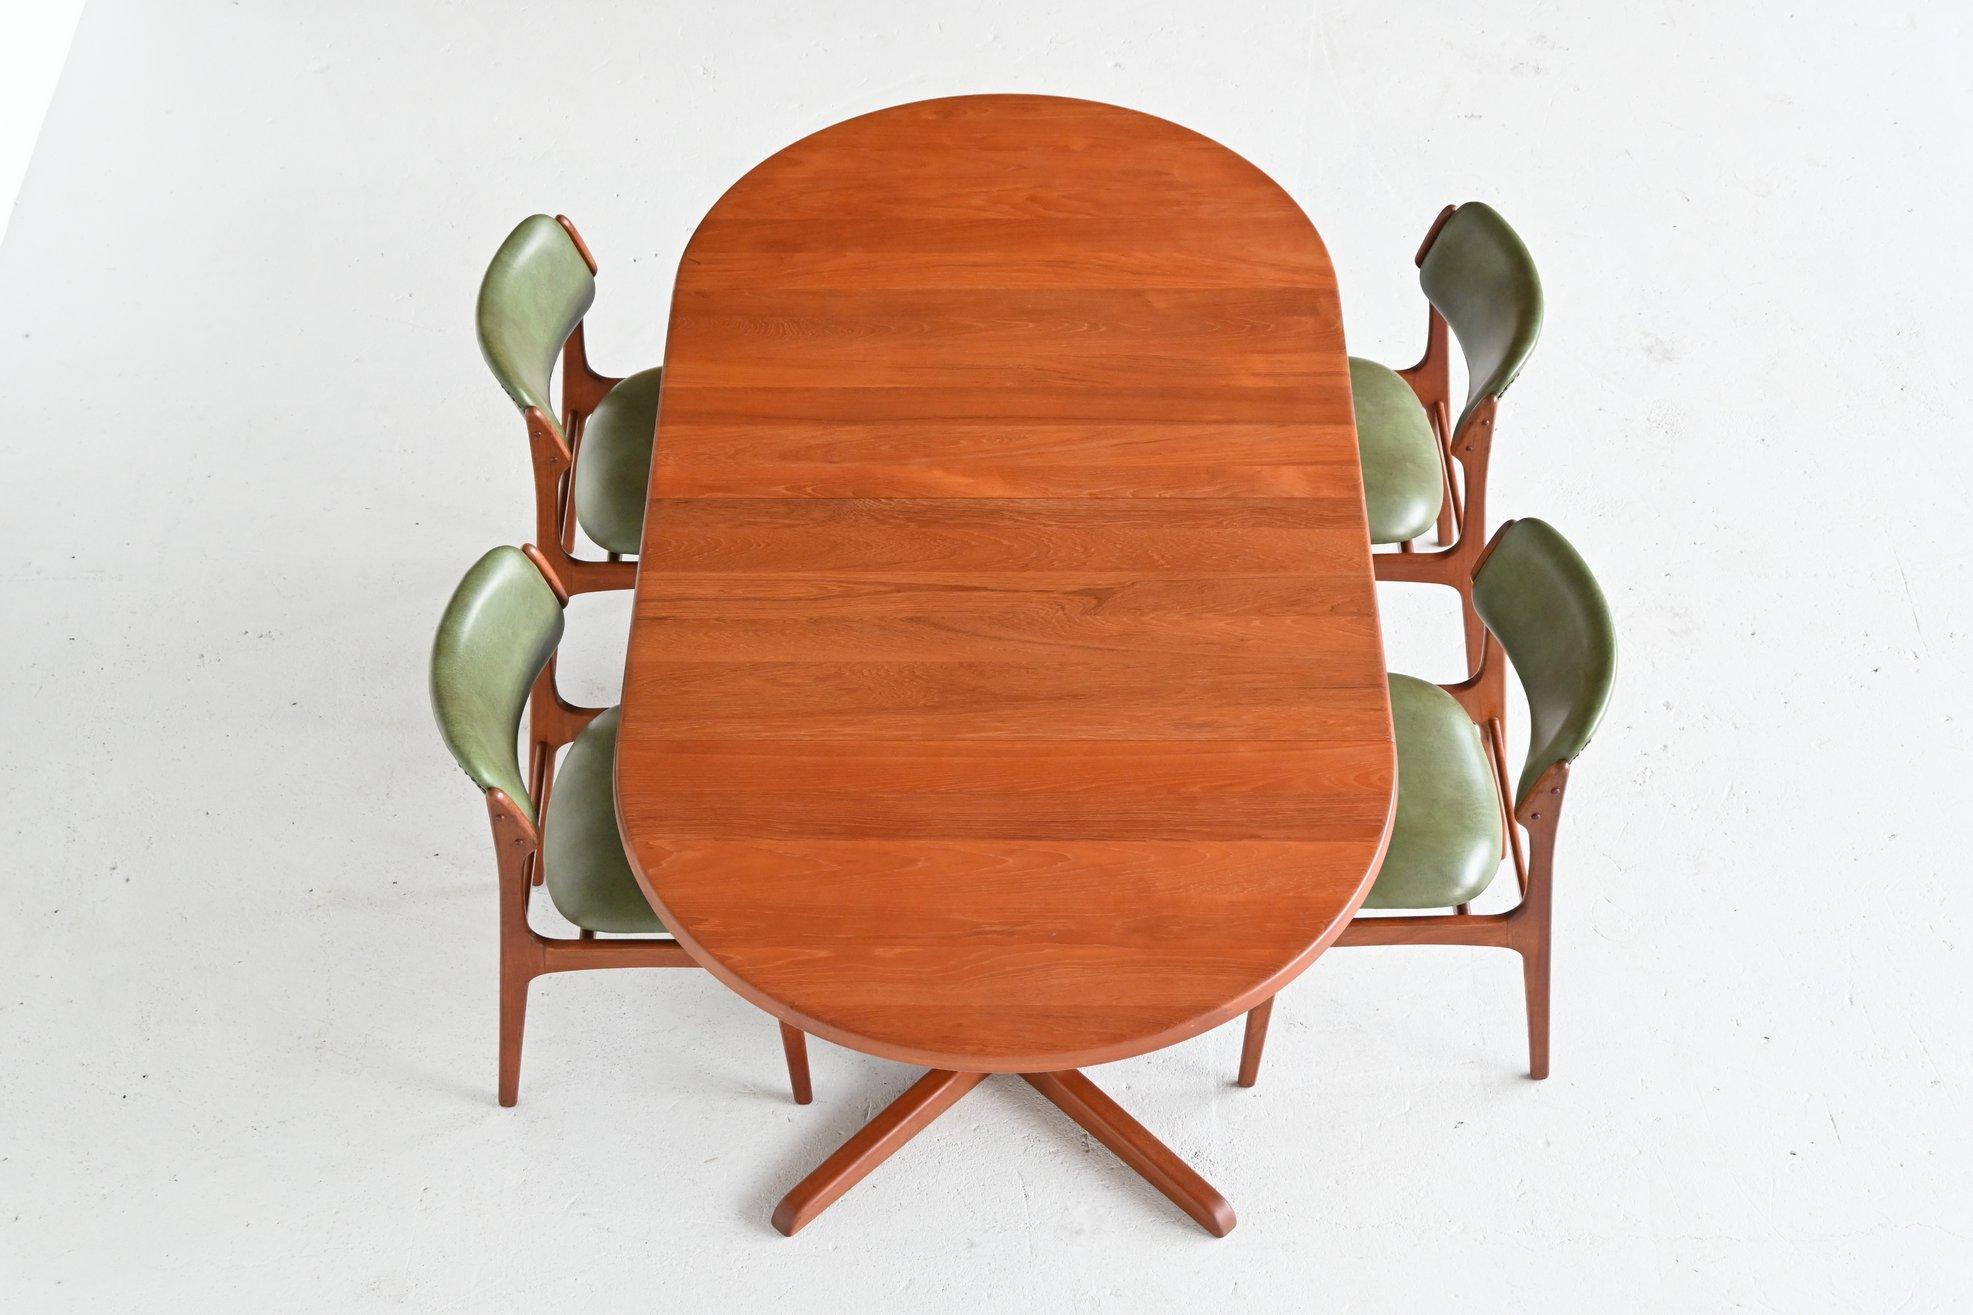 Very nicely crafted extendable dining table designed by A/S Niels Bach and manufactured by Randers Mobelfabrik, Denmark, 1960. This table is made of high quality teak wood and has a beautiful warm grain to the wood. Some very nice details are the